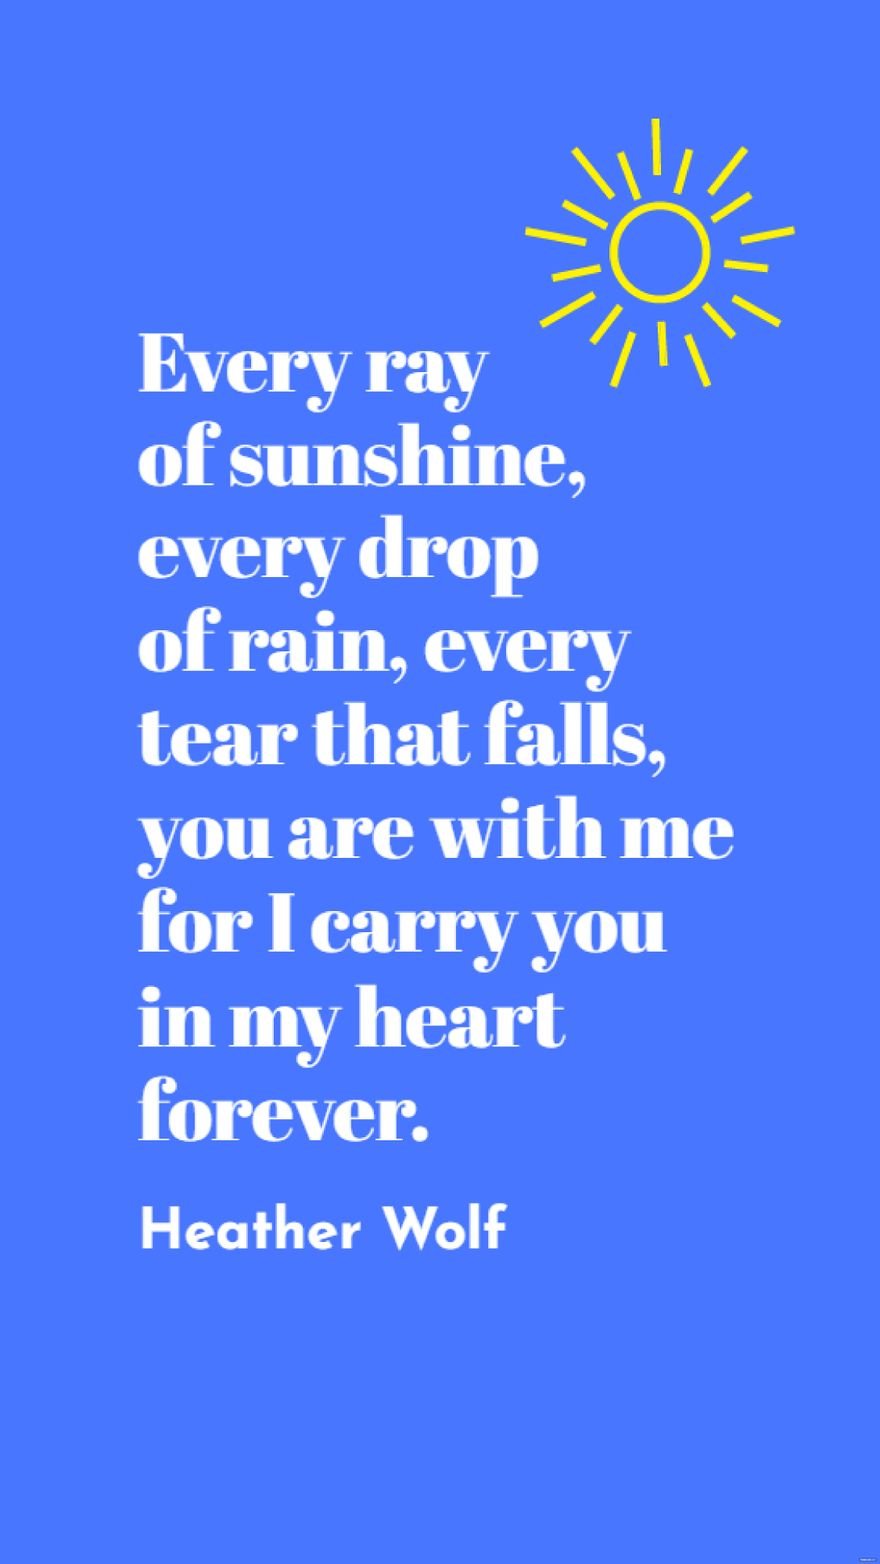 Heather Wolf - Every ray of sunshine, every drop of rain, every tear that falls, you are with me for I carry you in my heart forever.